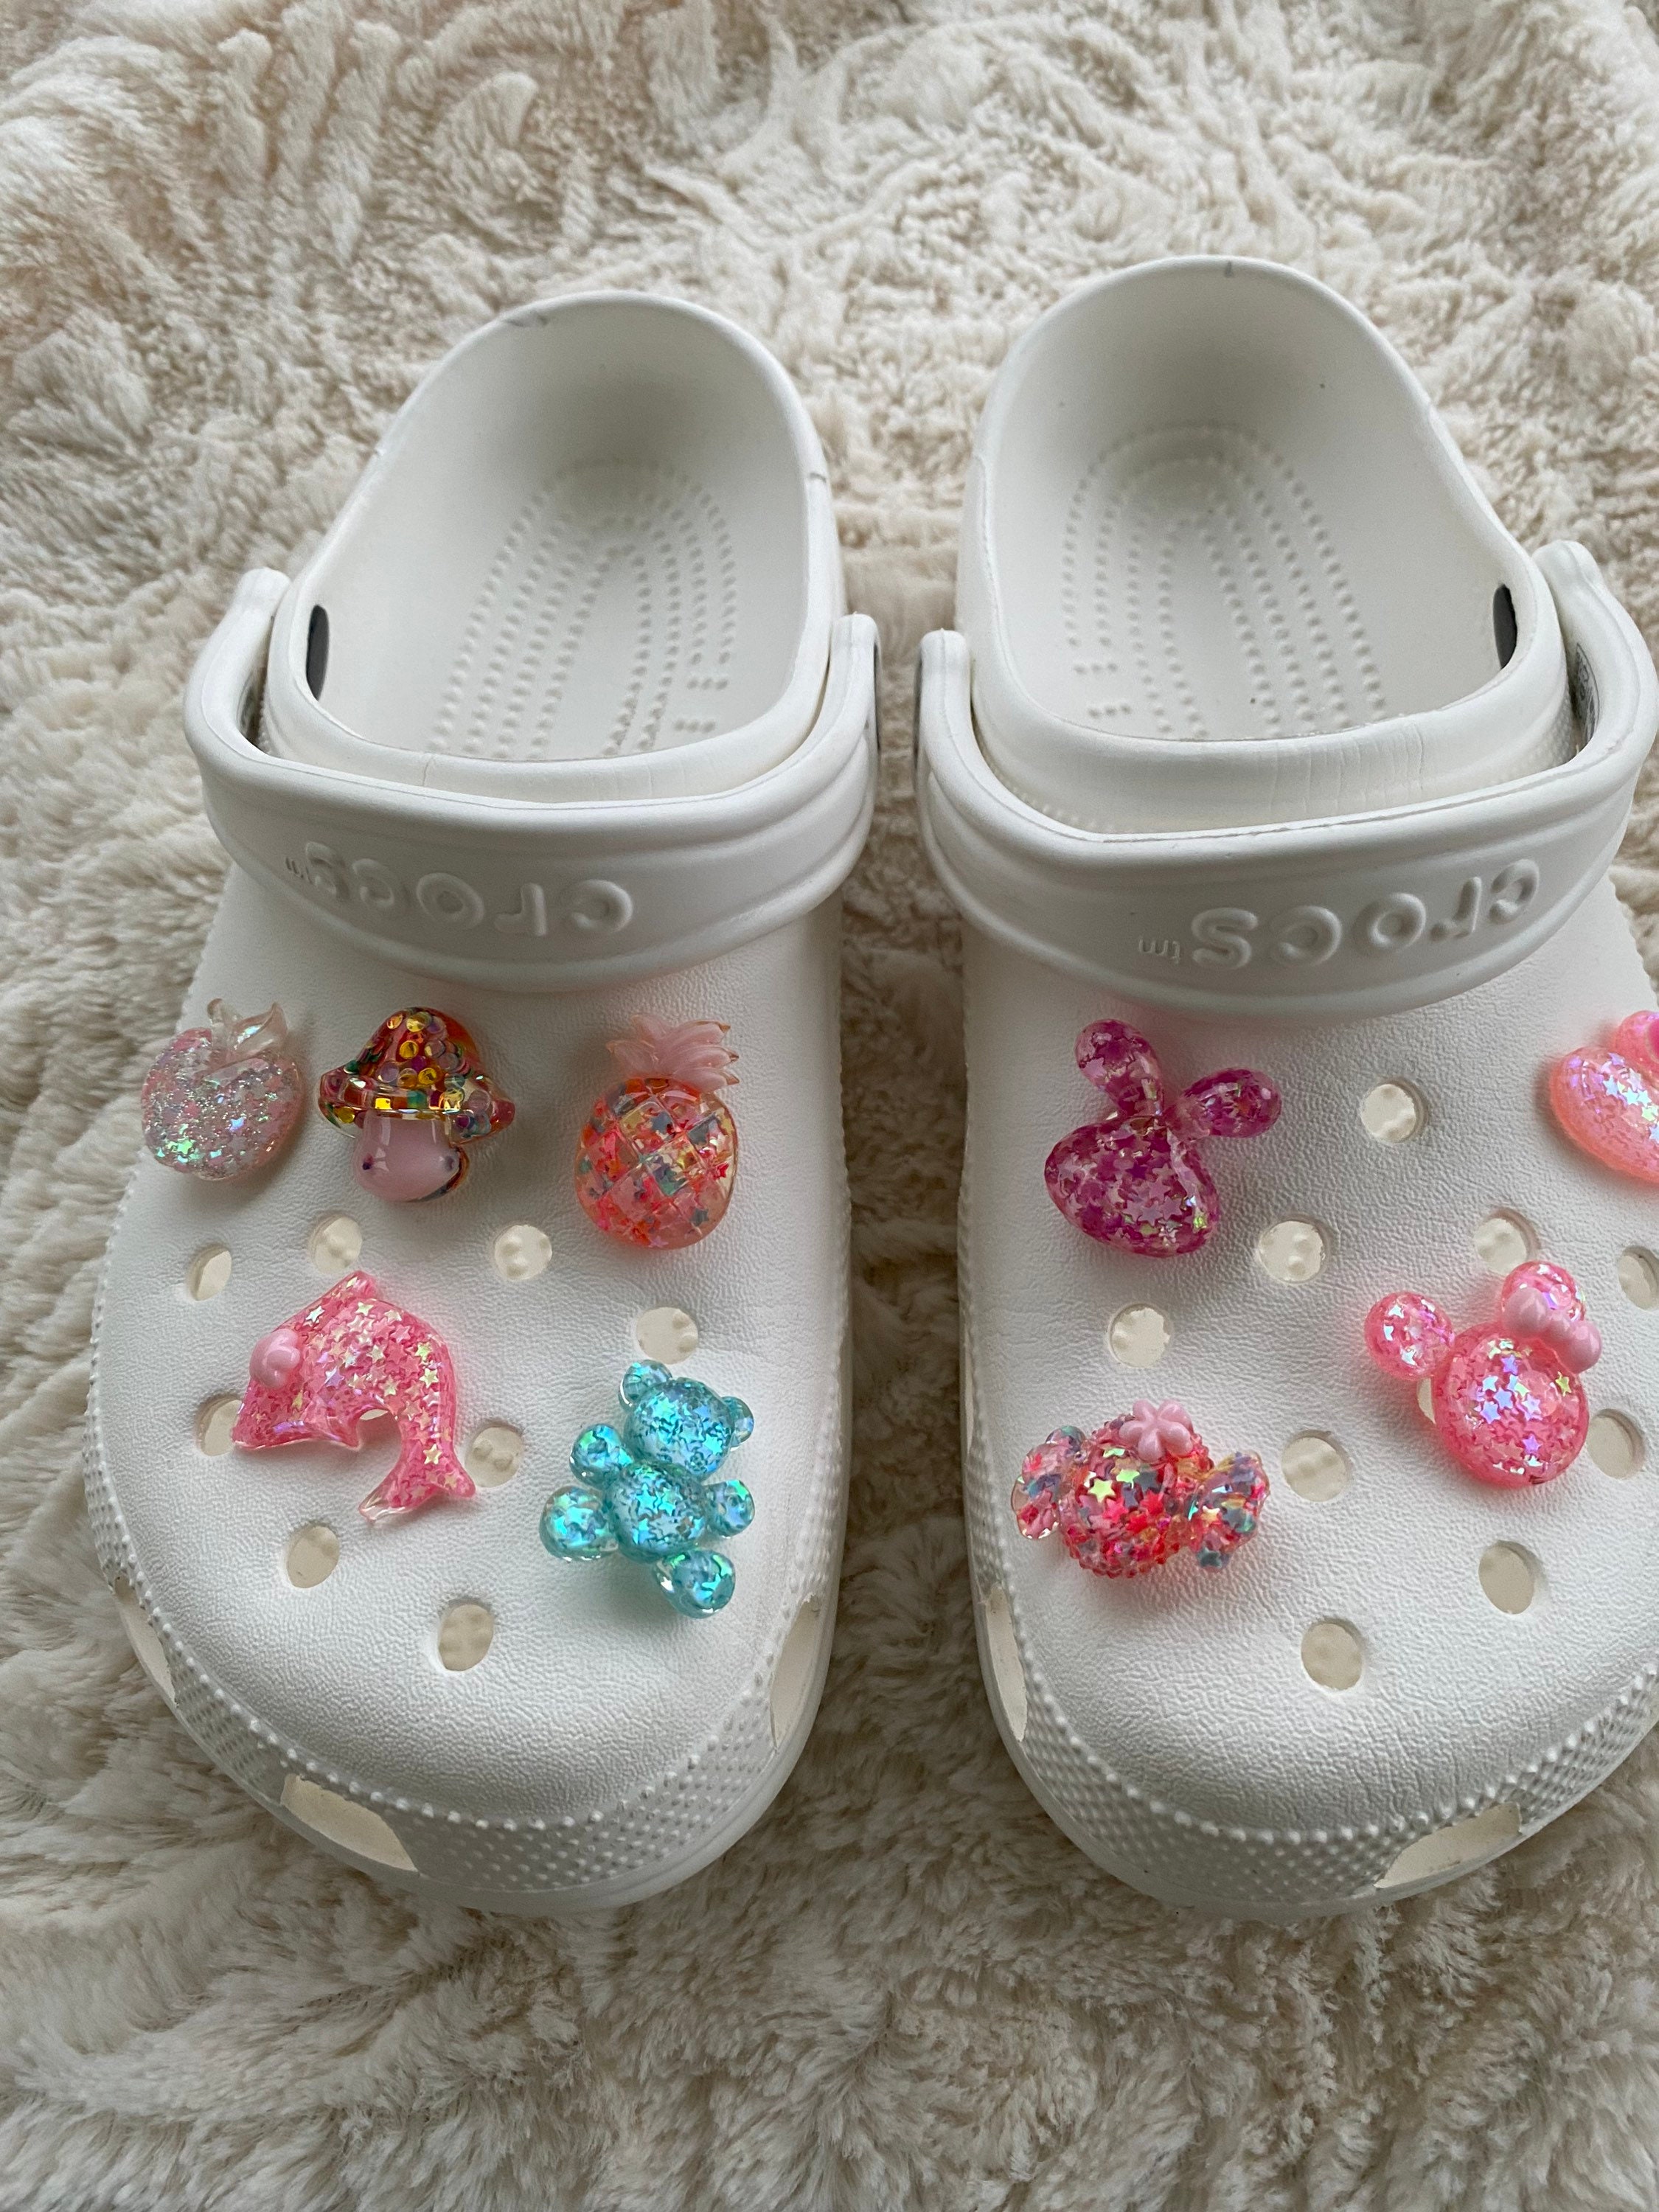 HOT】 1Pcs PVC Heart For Crocs Charms Jeans Accessories Slippers